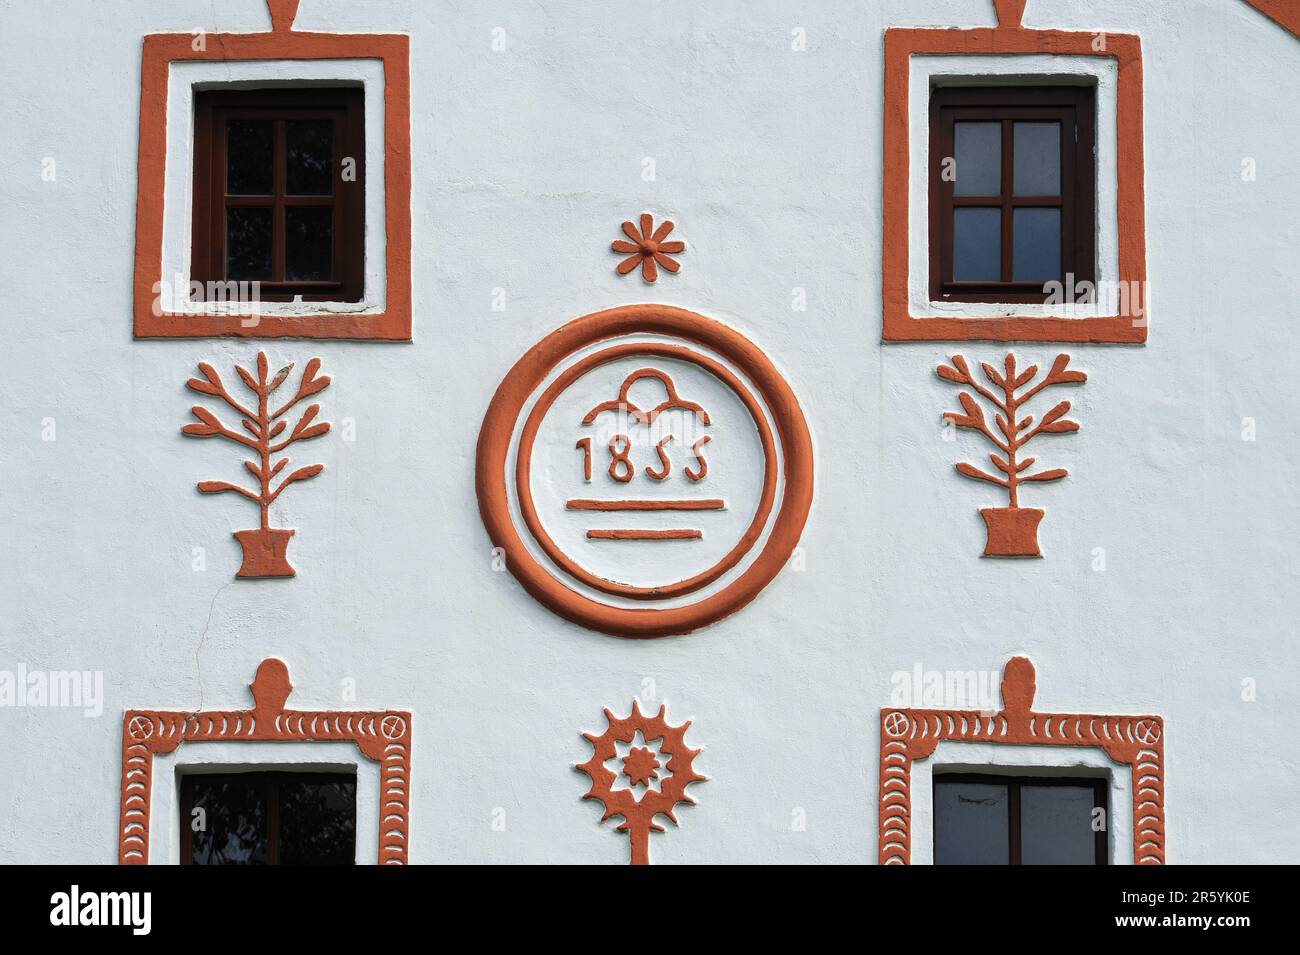 Stucco decoration on front of house in Holašovice, South Bohemia, Czech Republic or Czechia, displays the date of the house’s foundation, 1855.  Holašovice is a well-preserved example of a traditional Central European village with many farmers’ houses rebuilt in the 1800s AD in a style known as South Bohemian Folk Baroque, Rural Baroque or Rustic Baroque.   In 1997 the village was included in the UNESCO World Cultural Heritage List. Stock Photo